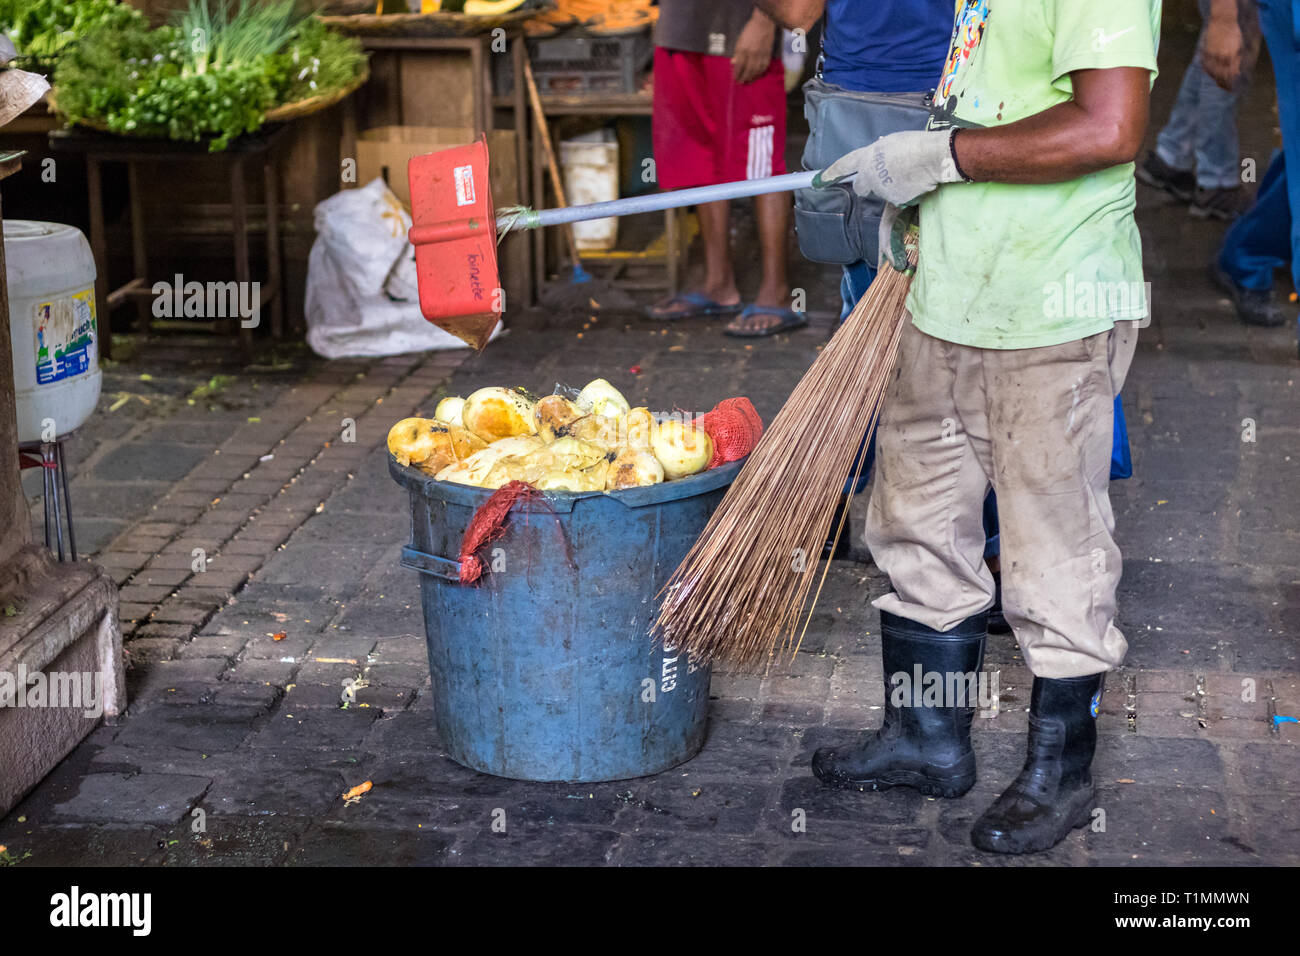 Port Louis, Mauritius - January 29, 2019: A male dustman collecting garbage at the Central Market in Port Louis, Mauritius. Stock Photo